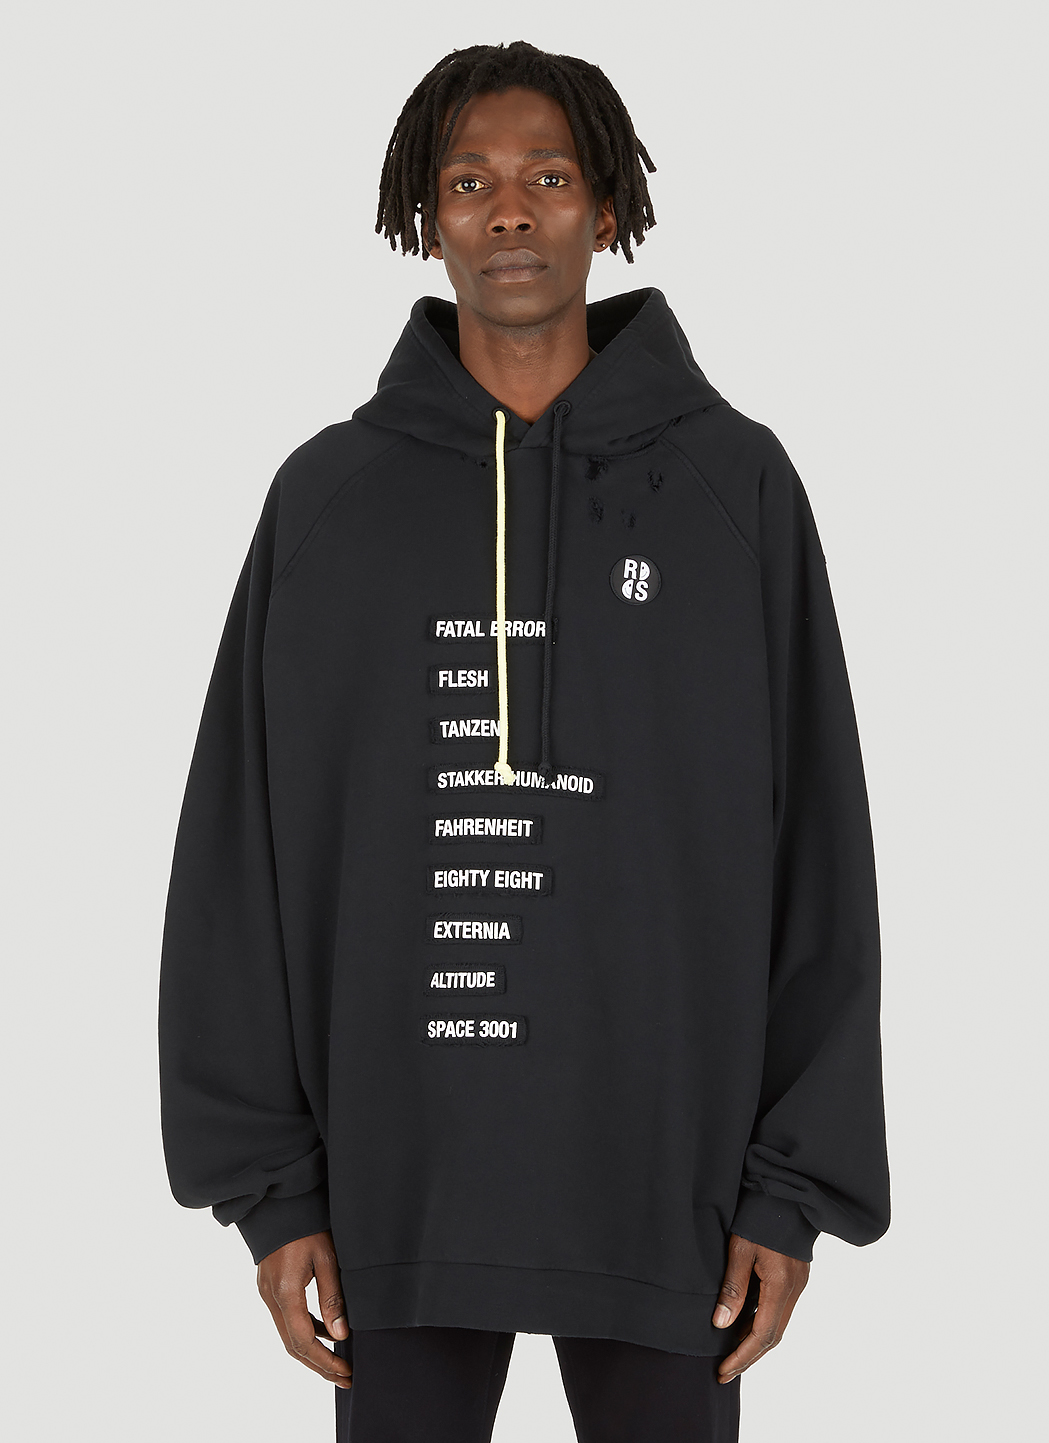 Raf Simons x Smiley Men's Big Fit Patched Text Hooded Sweatshirt